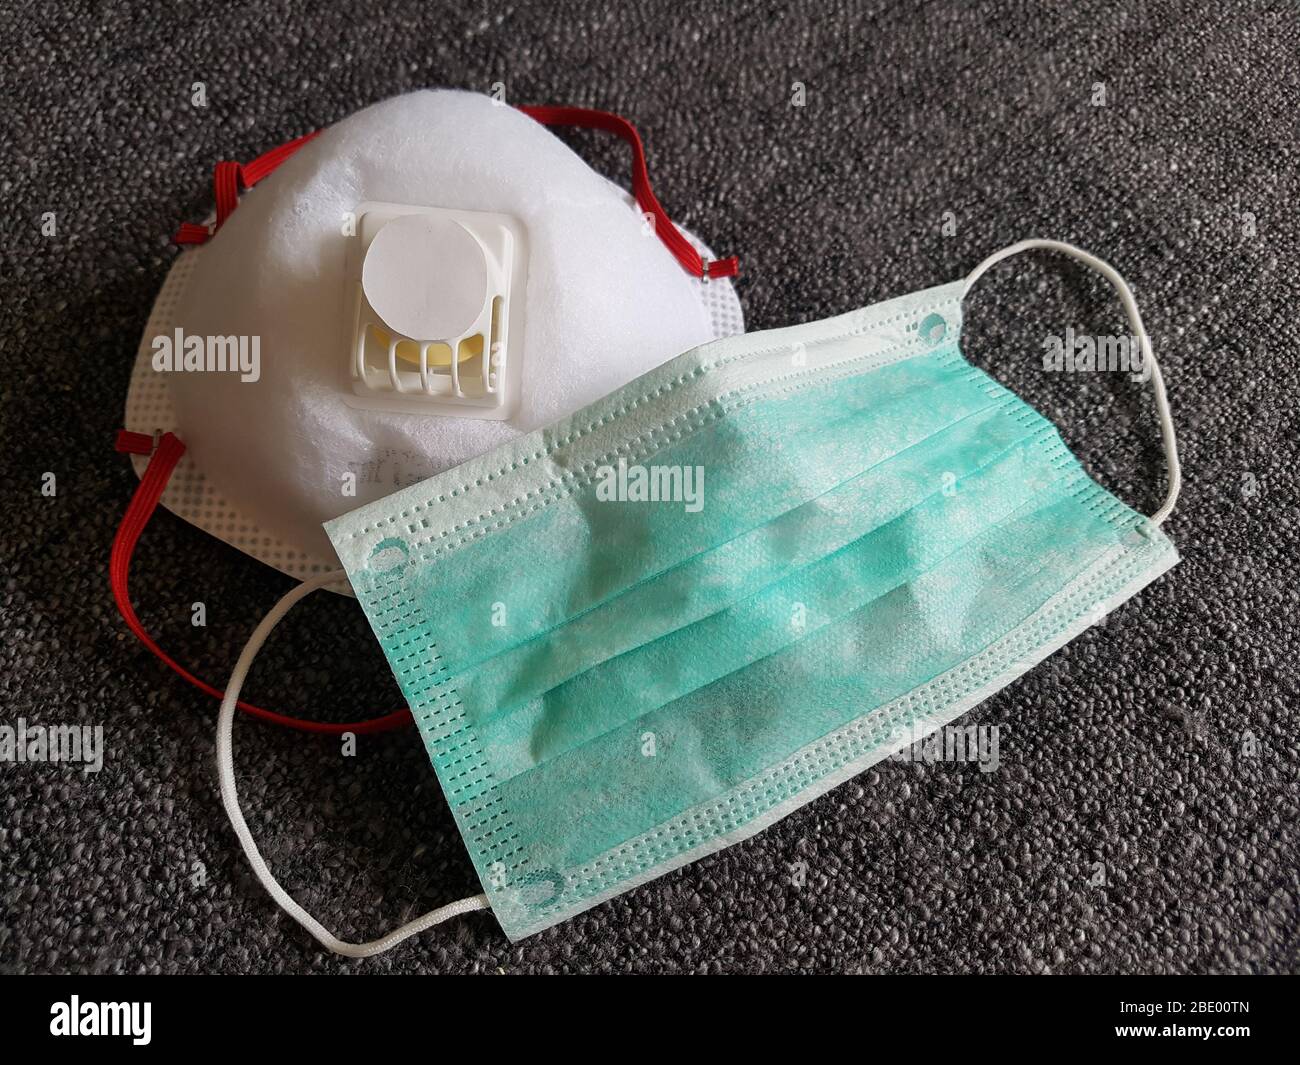 Differerent face mask variants - dust respirator ffp3 & green surgical mask used by hospitals / doctors / nurse for protection - corona virus covid-19 Stock Photo